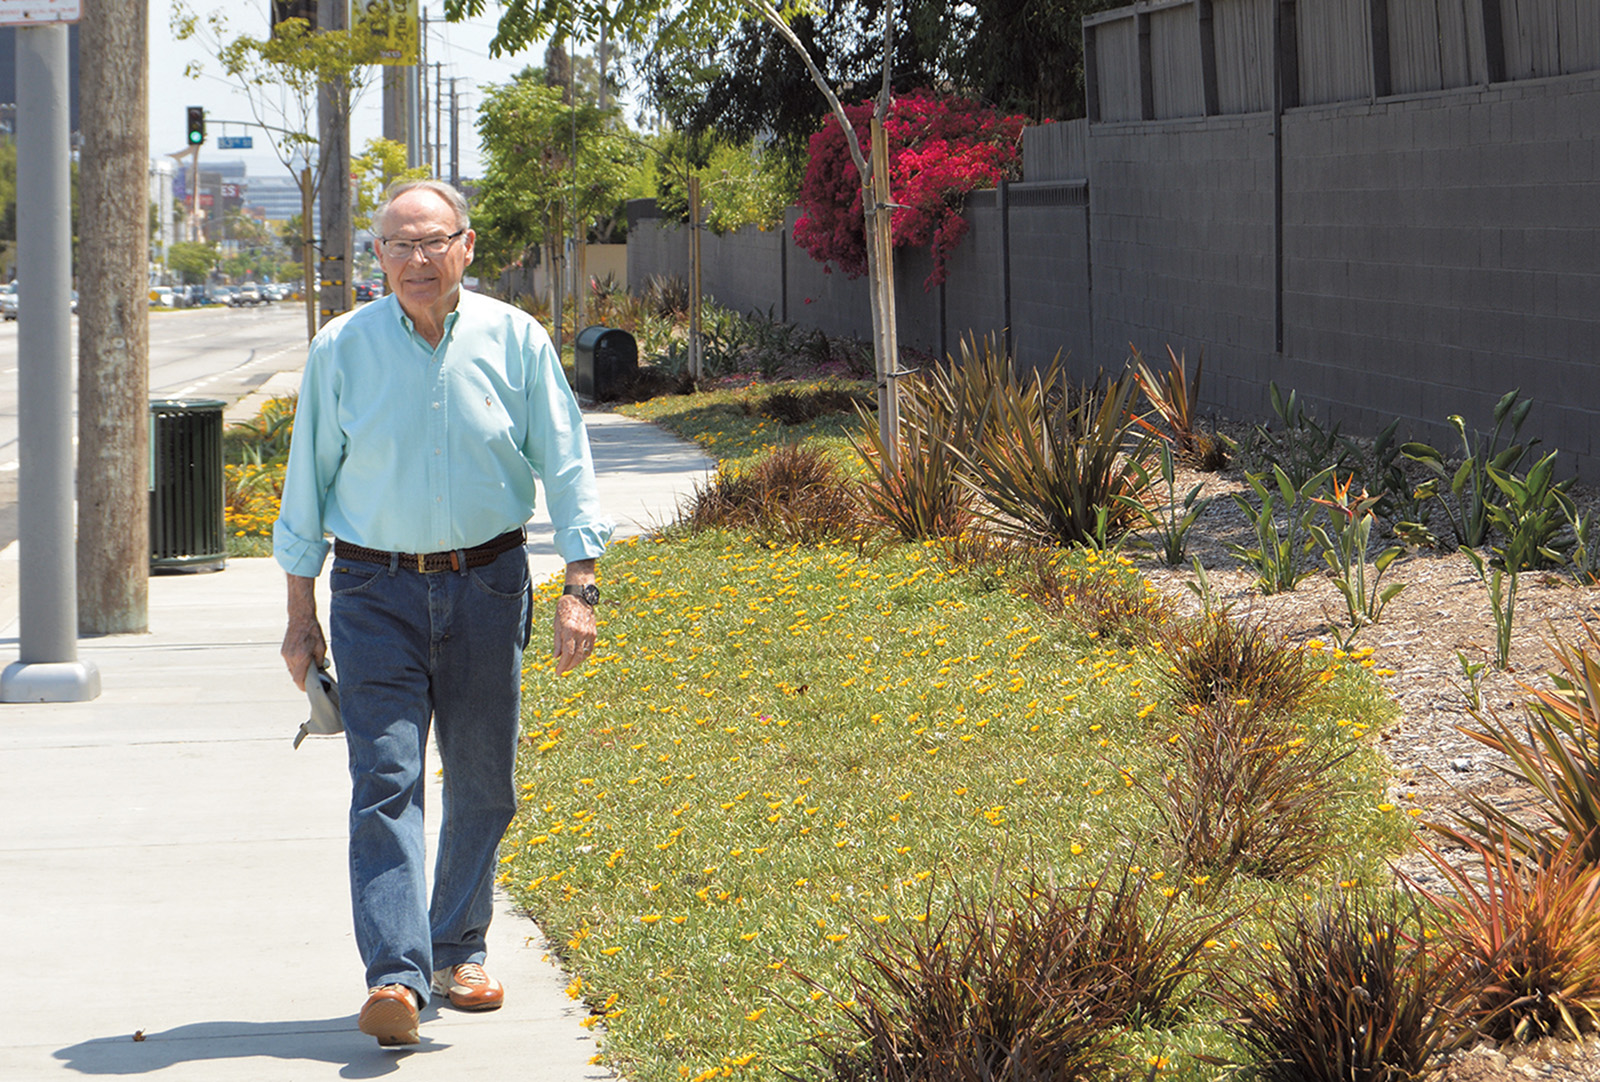 Think Sepulveda looks great? You can thank John Ruhlen